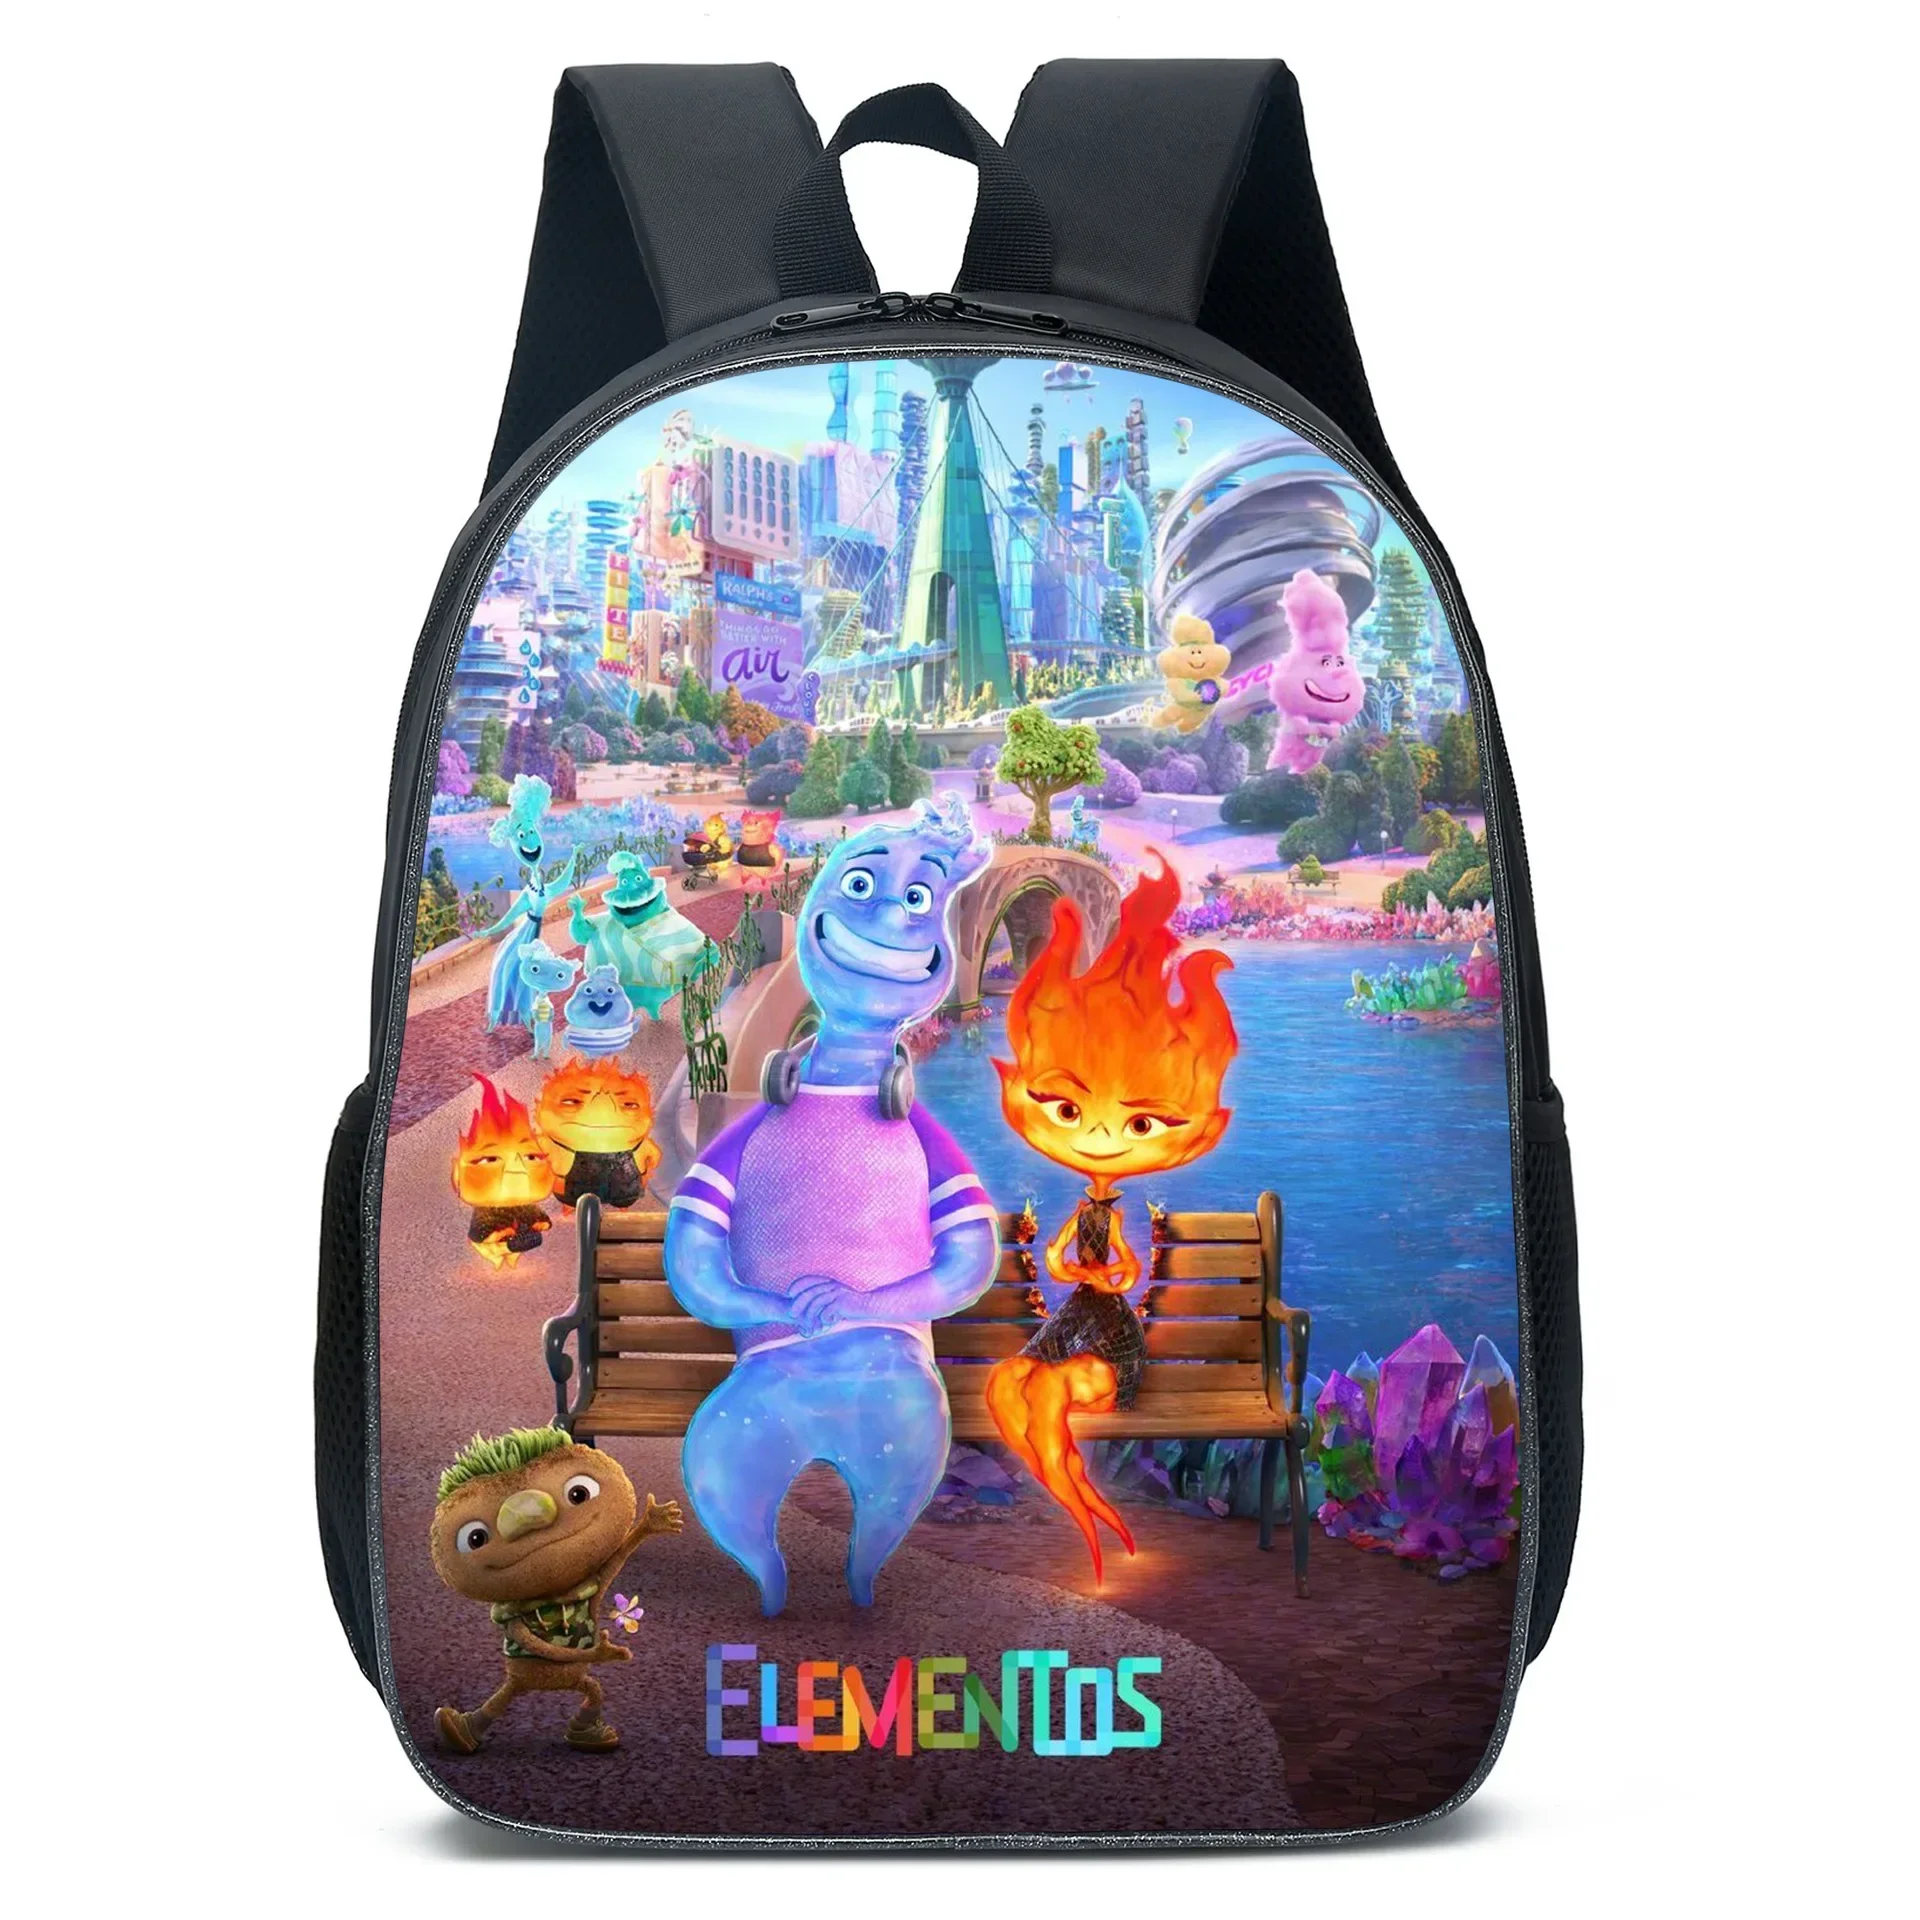 

Disney Elemental Two-dimensional School Bag for Primary and Secondary School Students and Children’s Backpack Best Gift